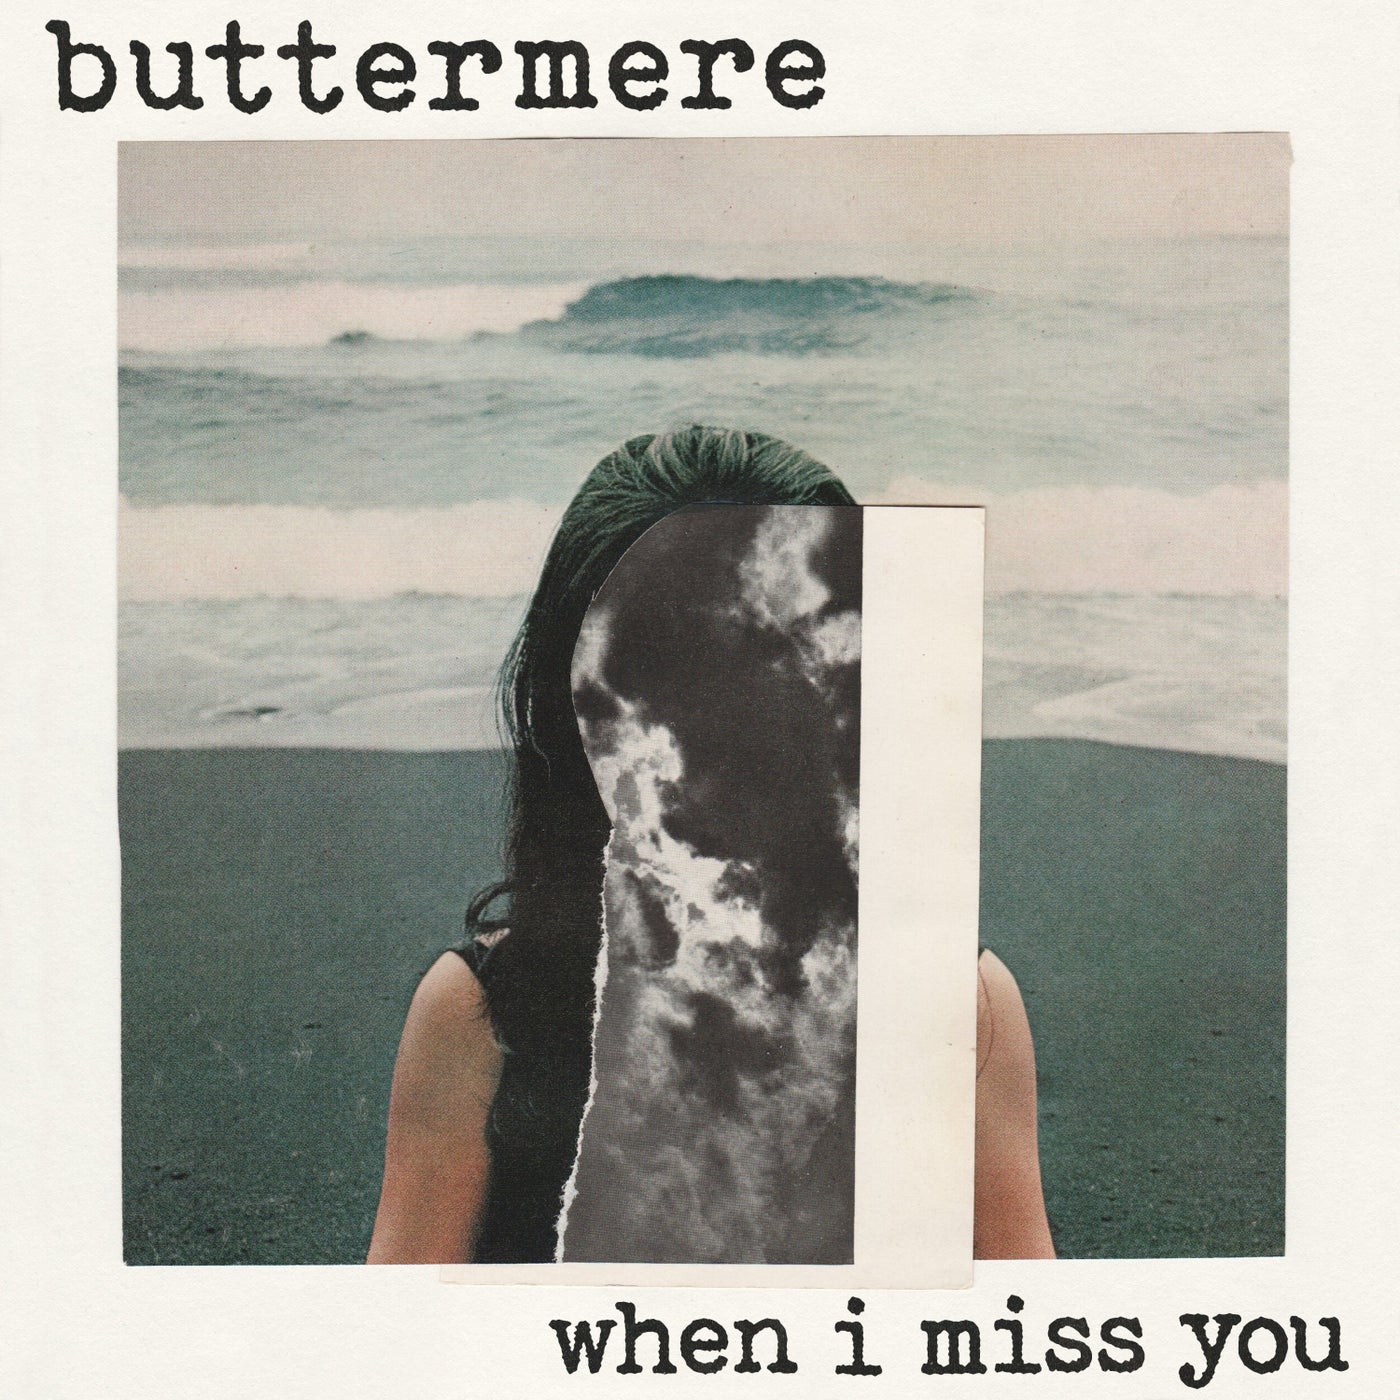 Buttermere – When I Miss You [BTM003]